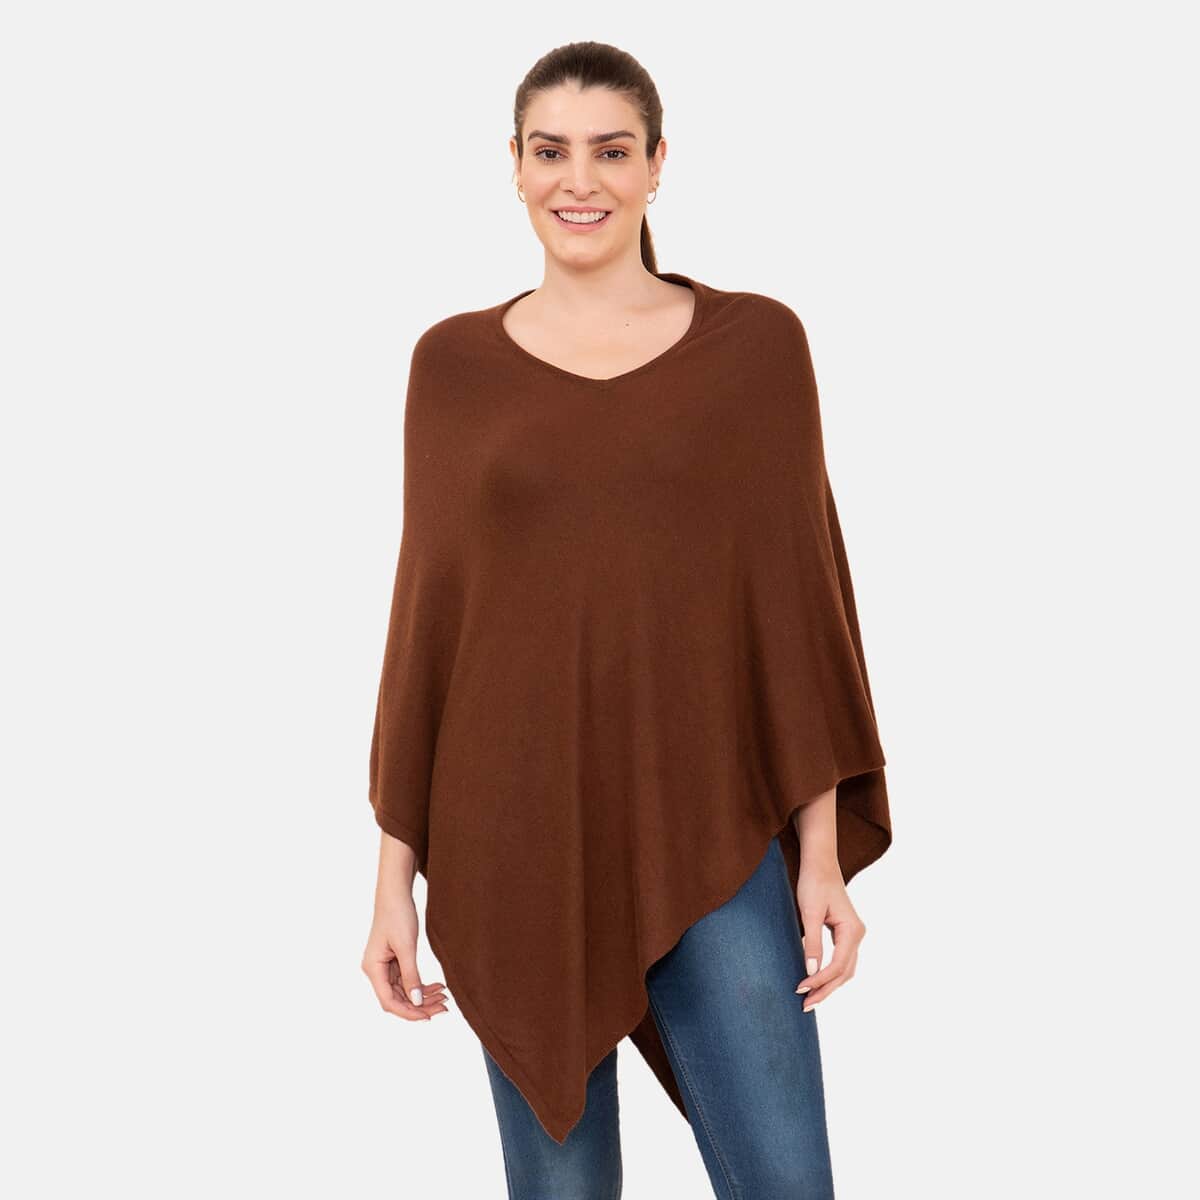 100% Cashmere Wool Designer LA MAREY Chocolate Brown Poncho - One Size Fits Most image number 2